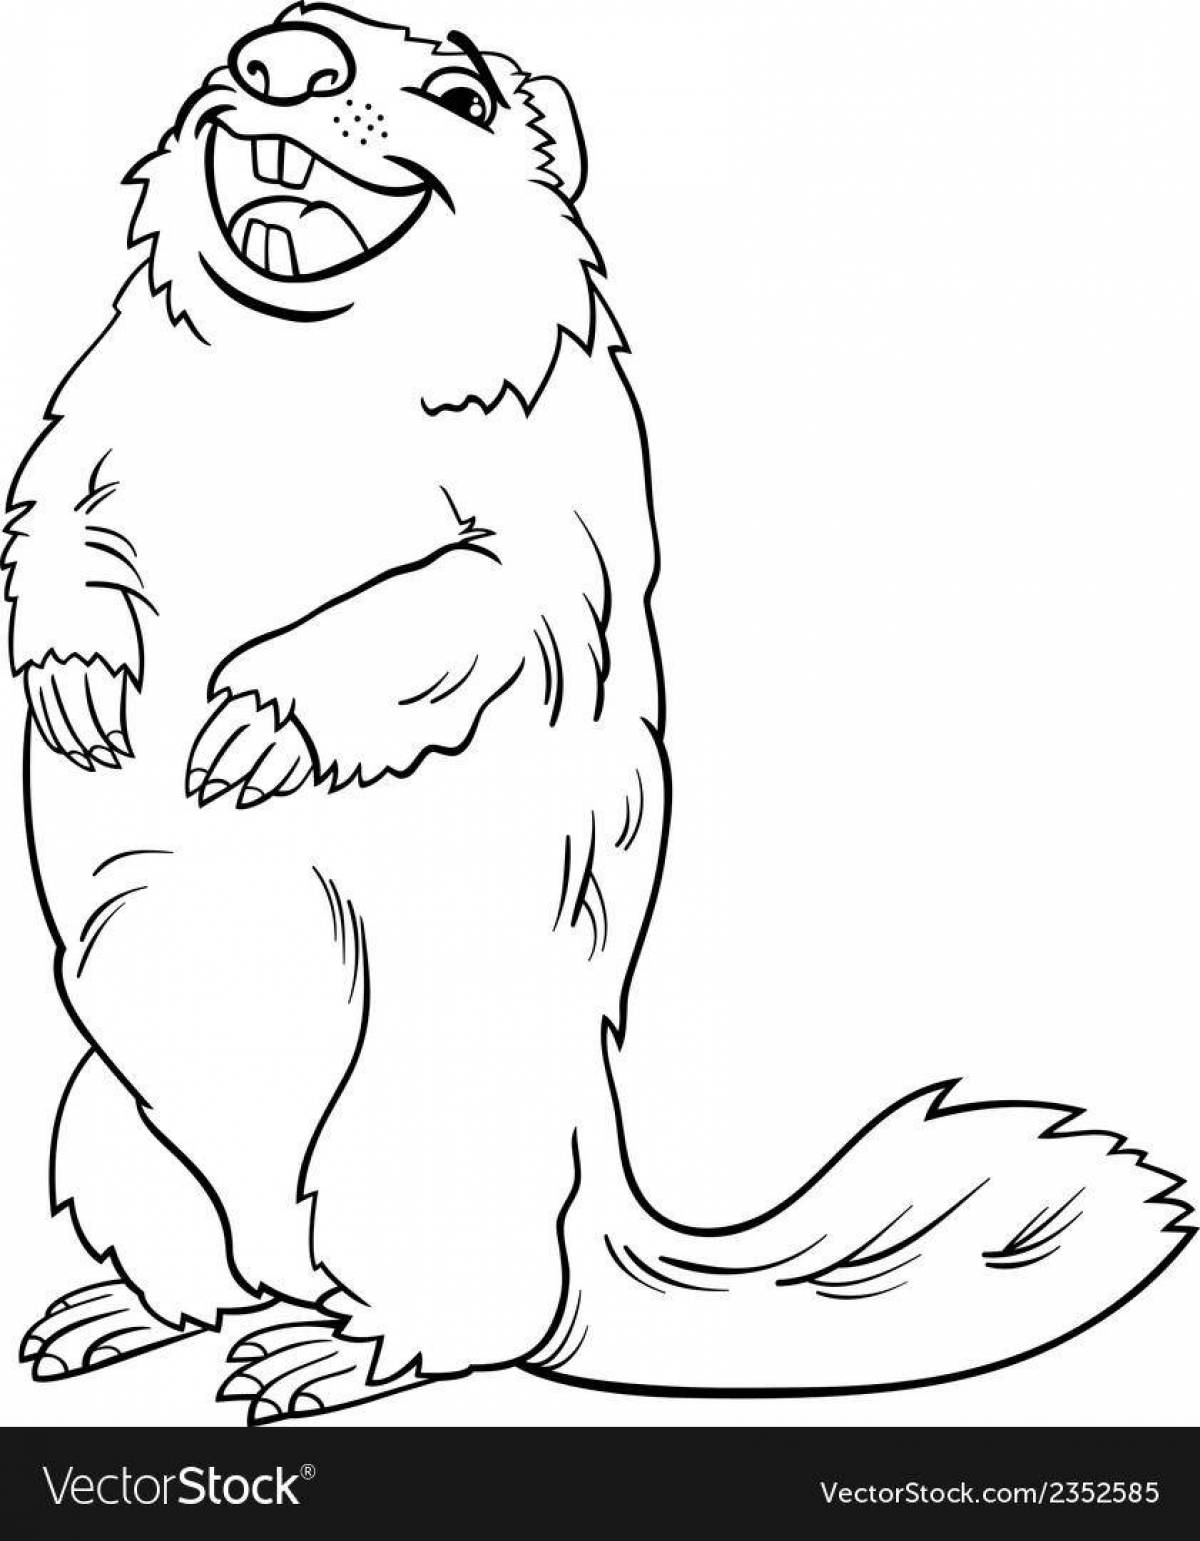 Glory Groundhog Day coloring page